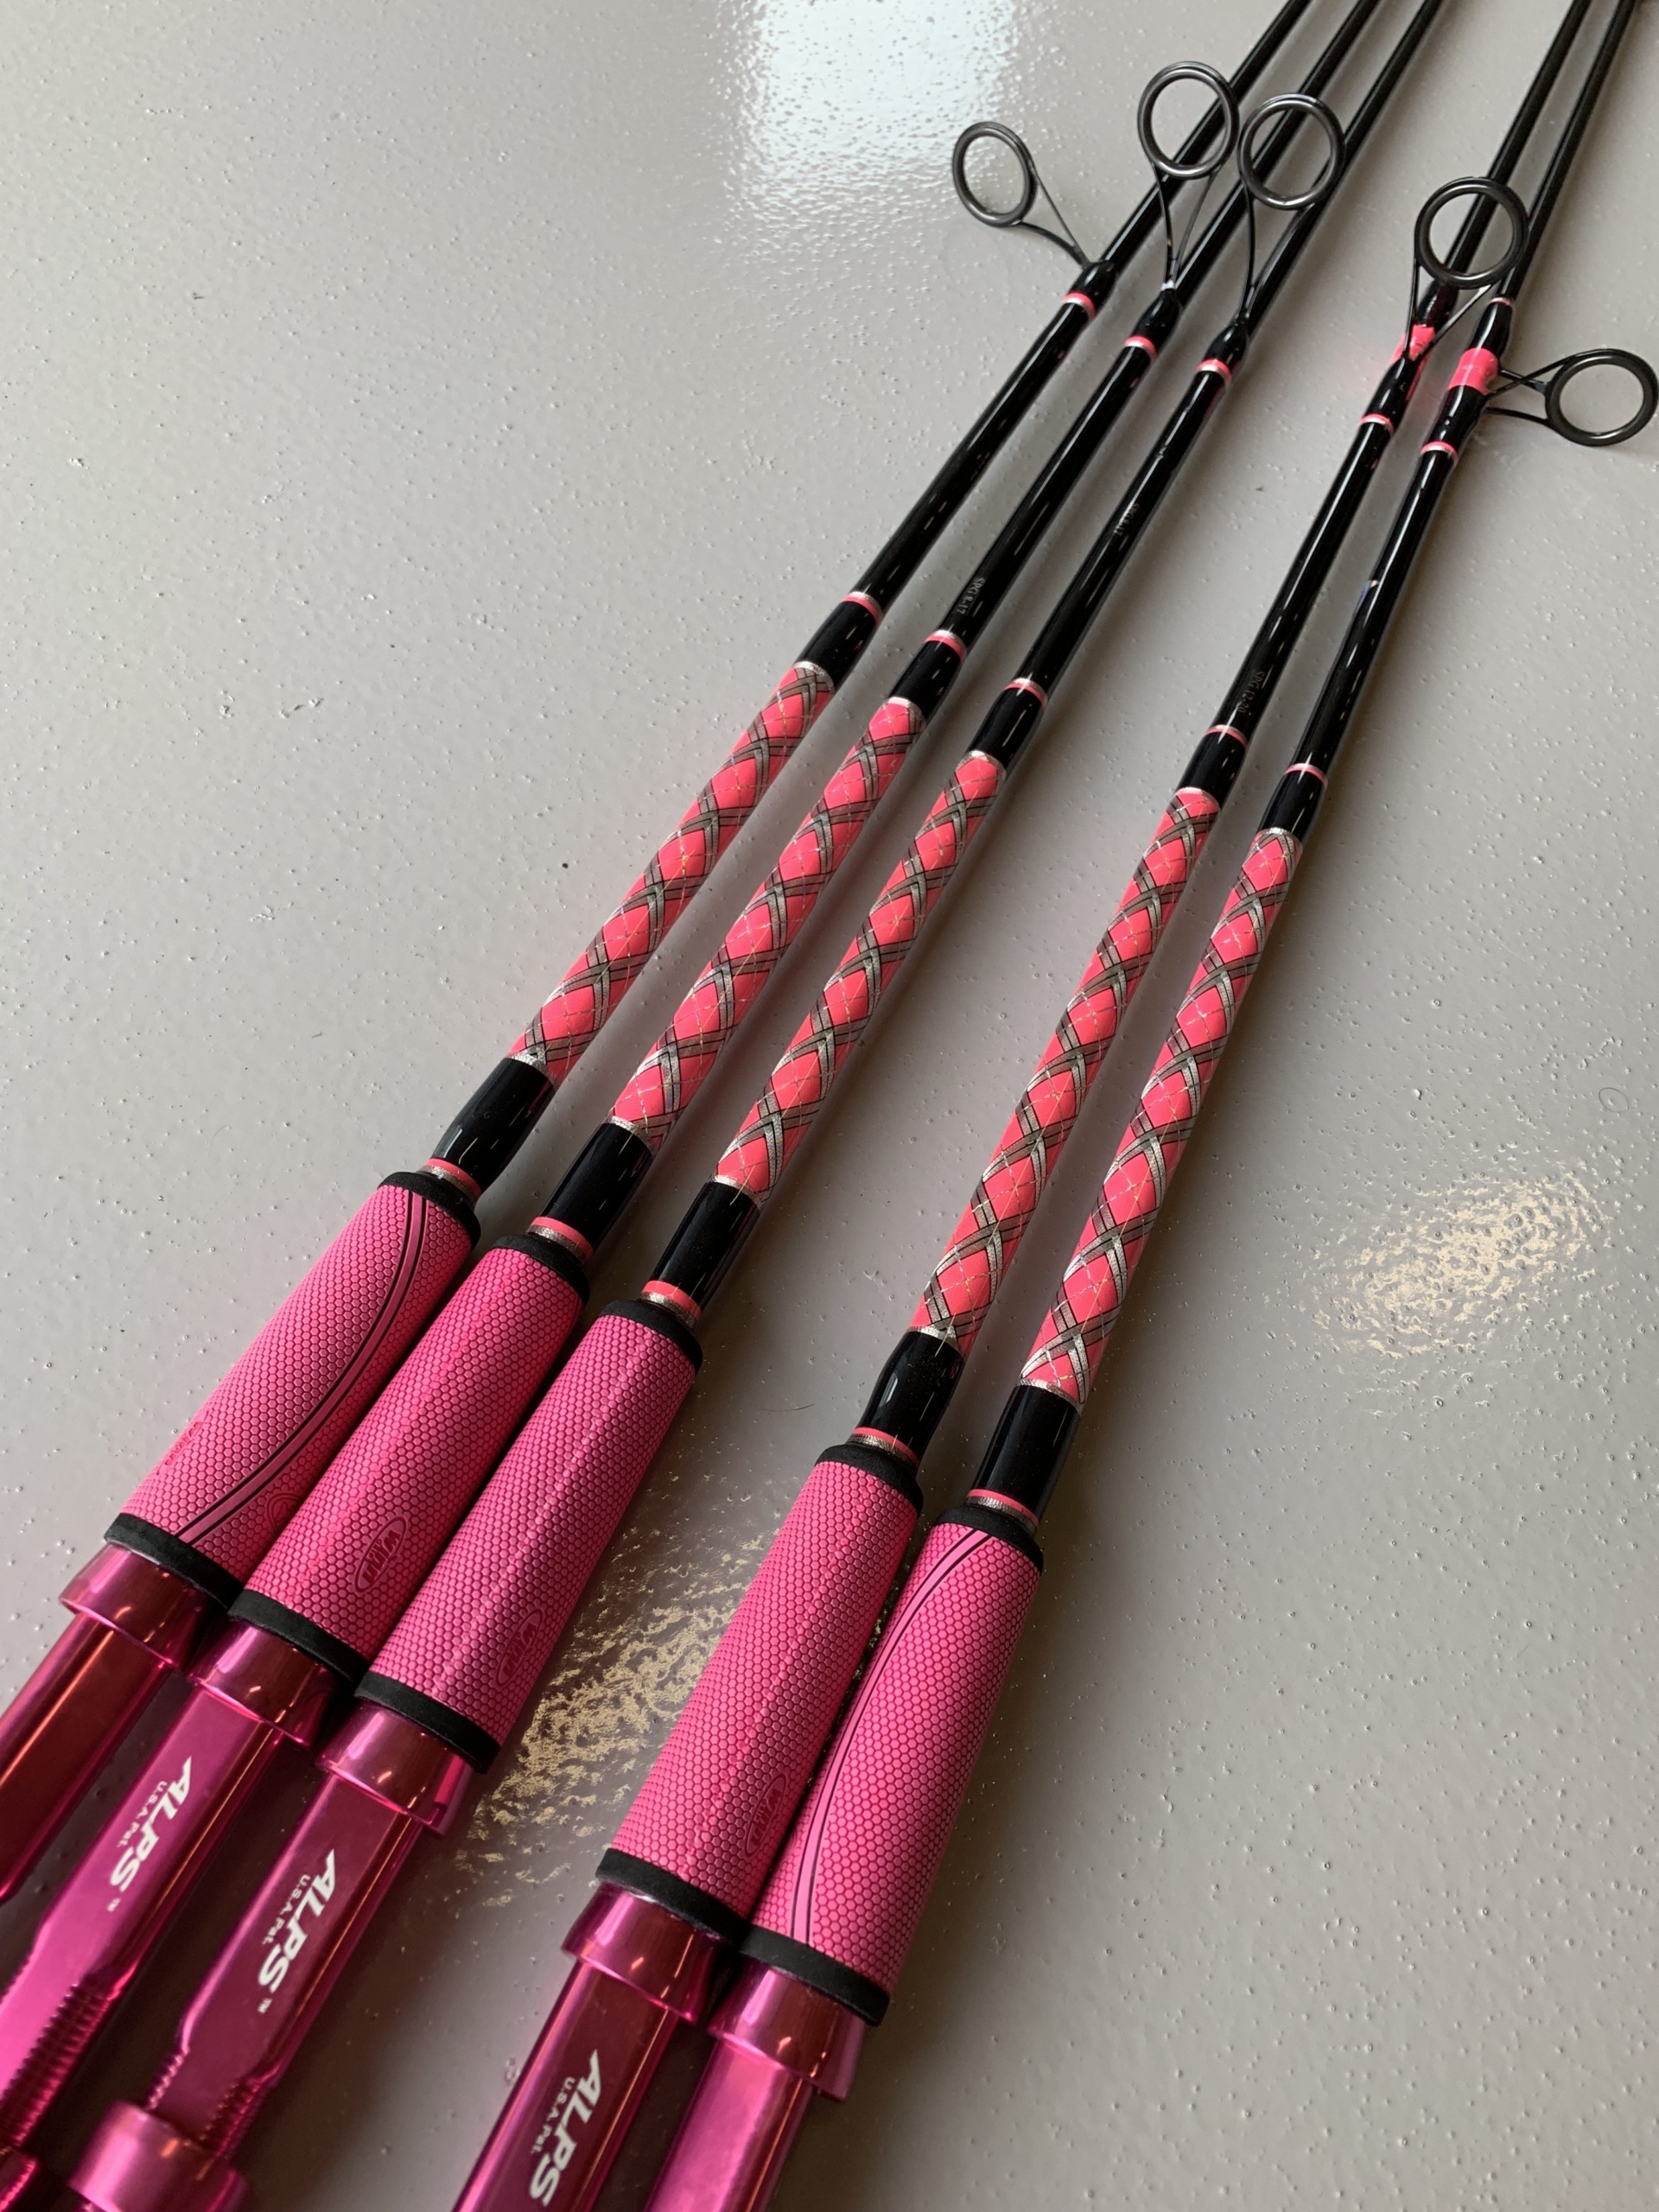 7' Graphite Spin (Pink)